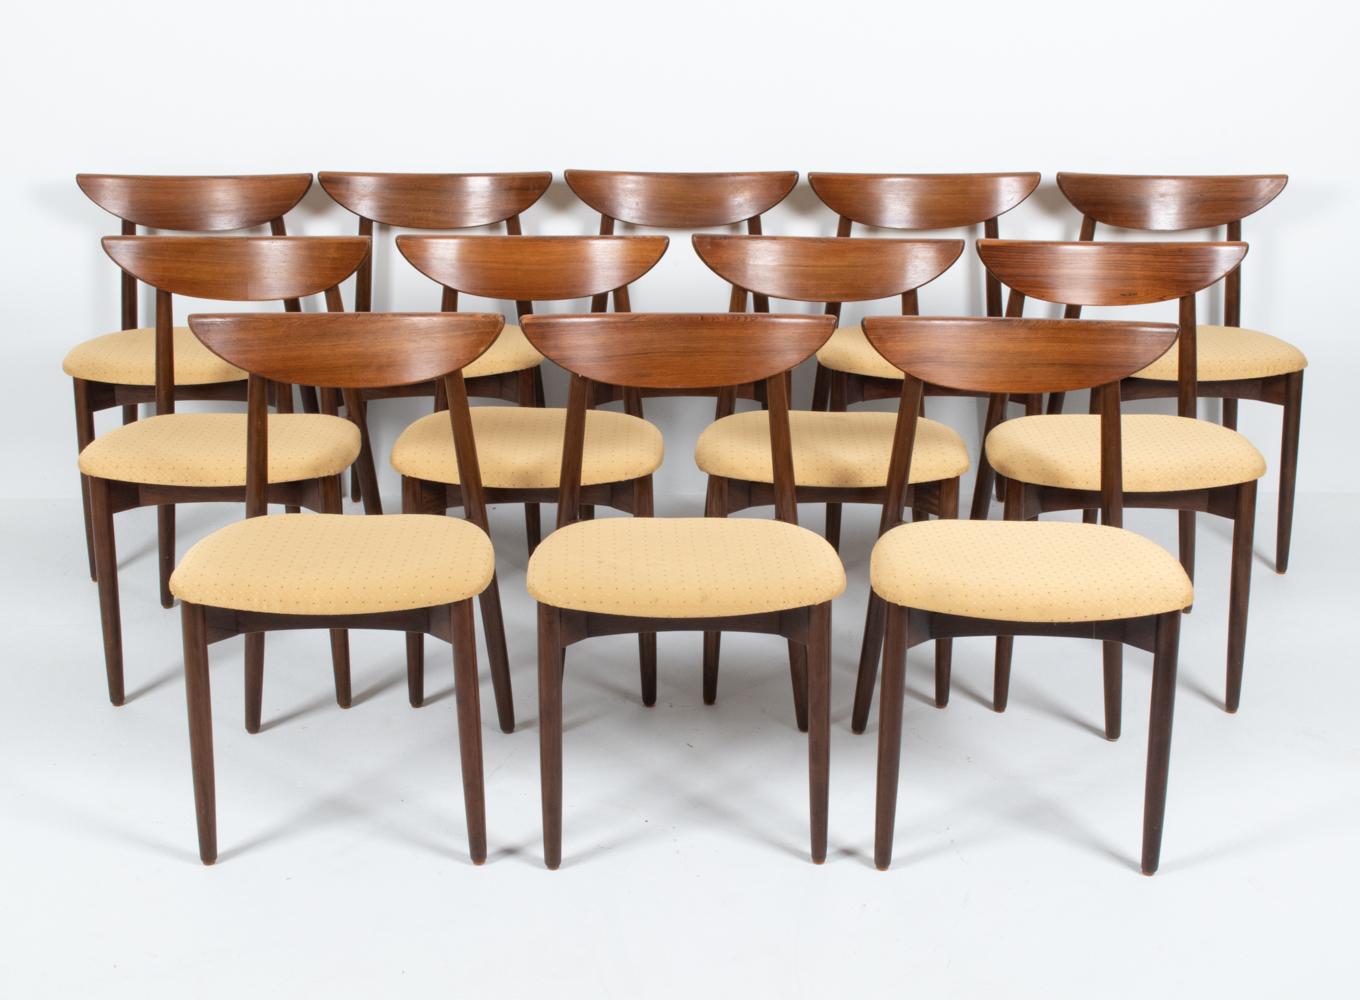 Impress your guests with this fabulous set of twelve rare dining chairs, designed by renowned Danish designer Harry Ostergaard. These model 58 dining side chairs are most identifiable by their iconic sculptural backrests, reminiscent of a crescent